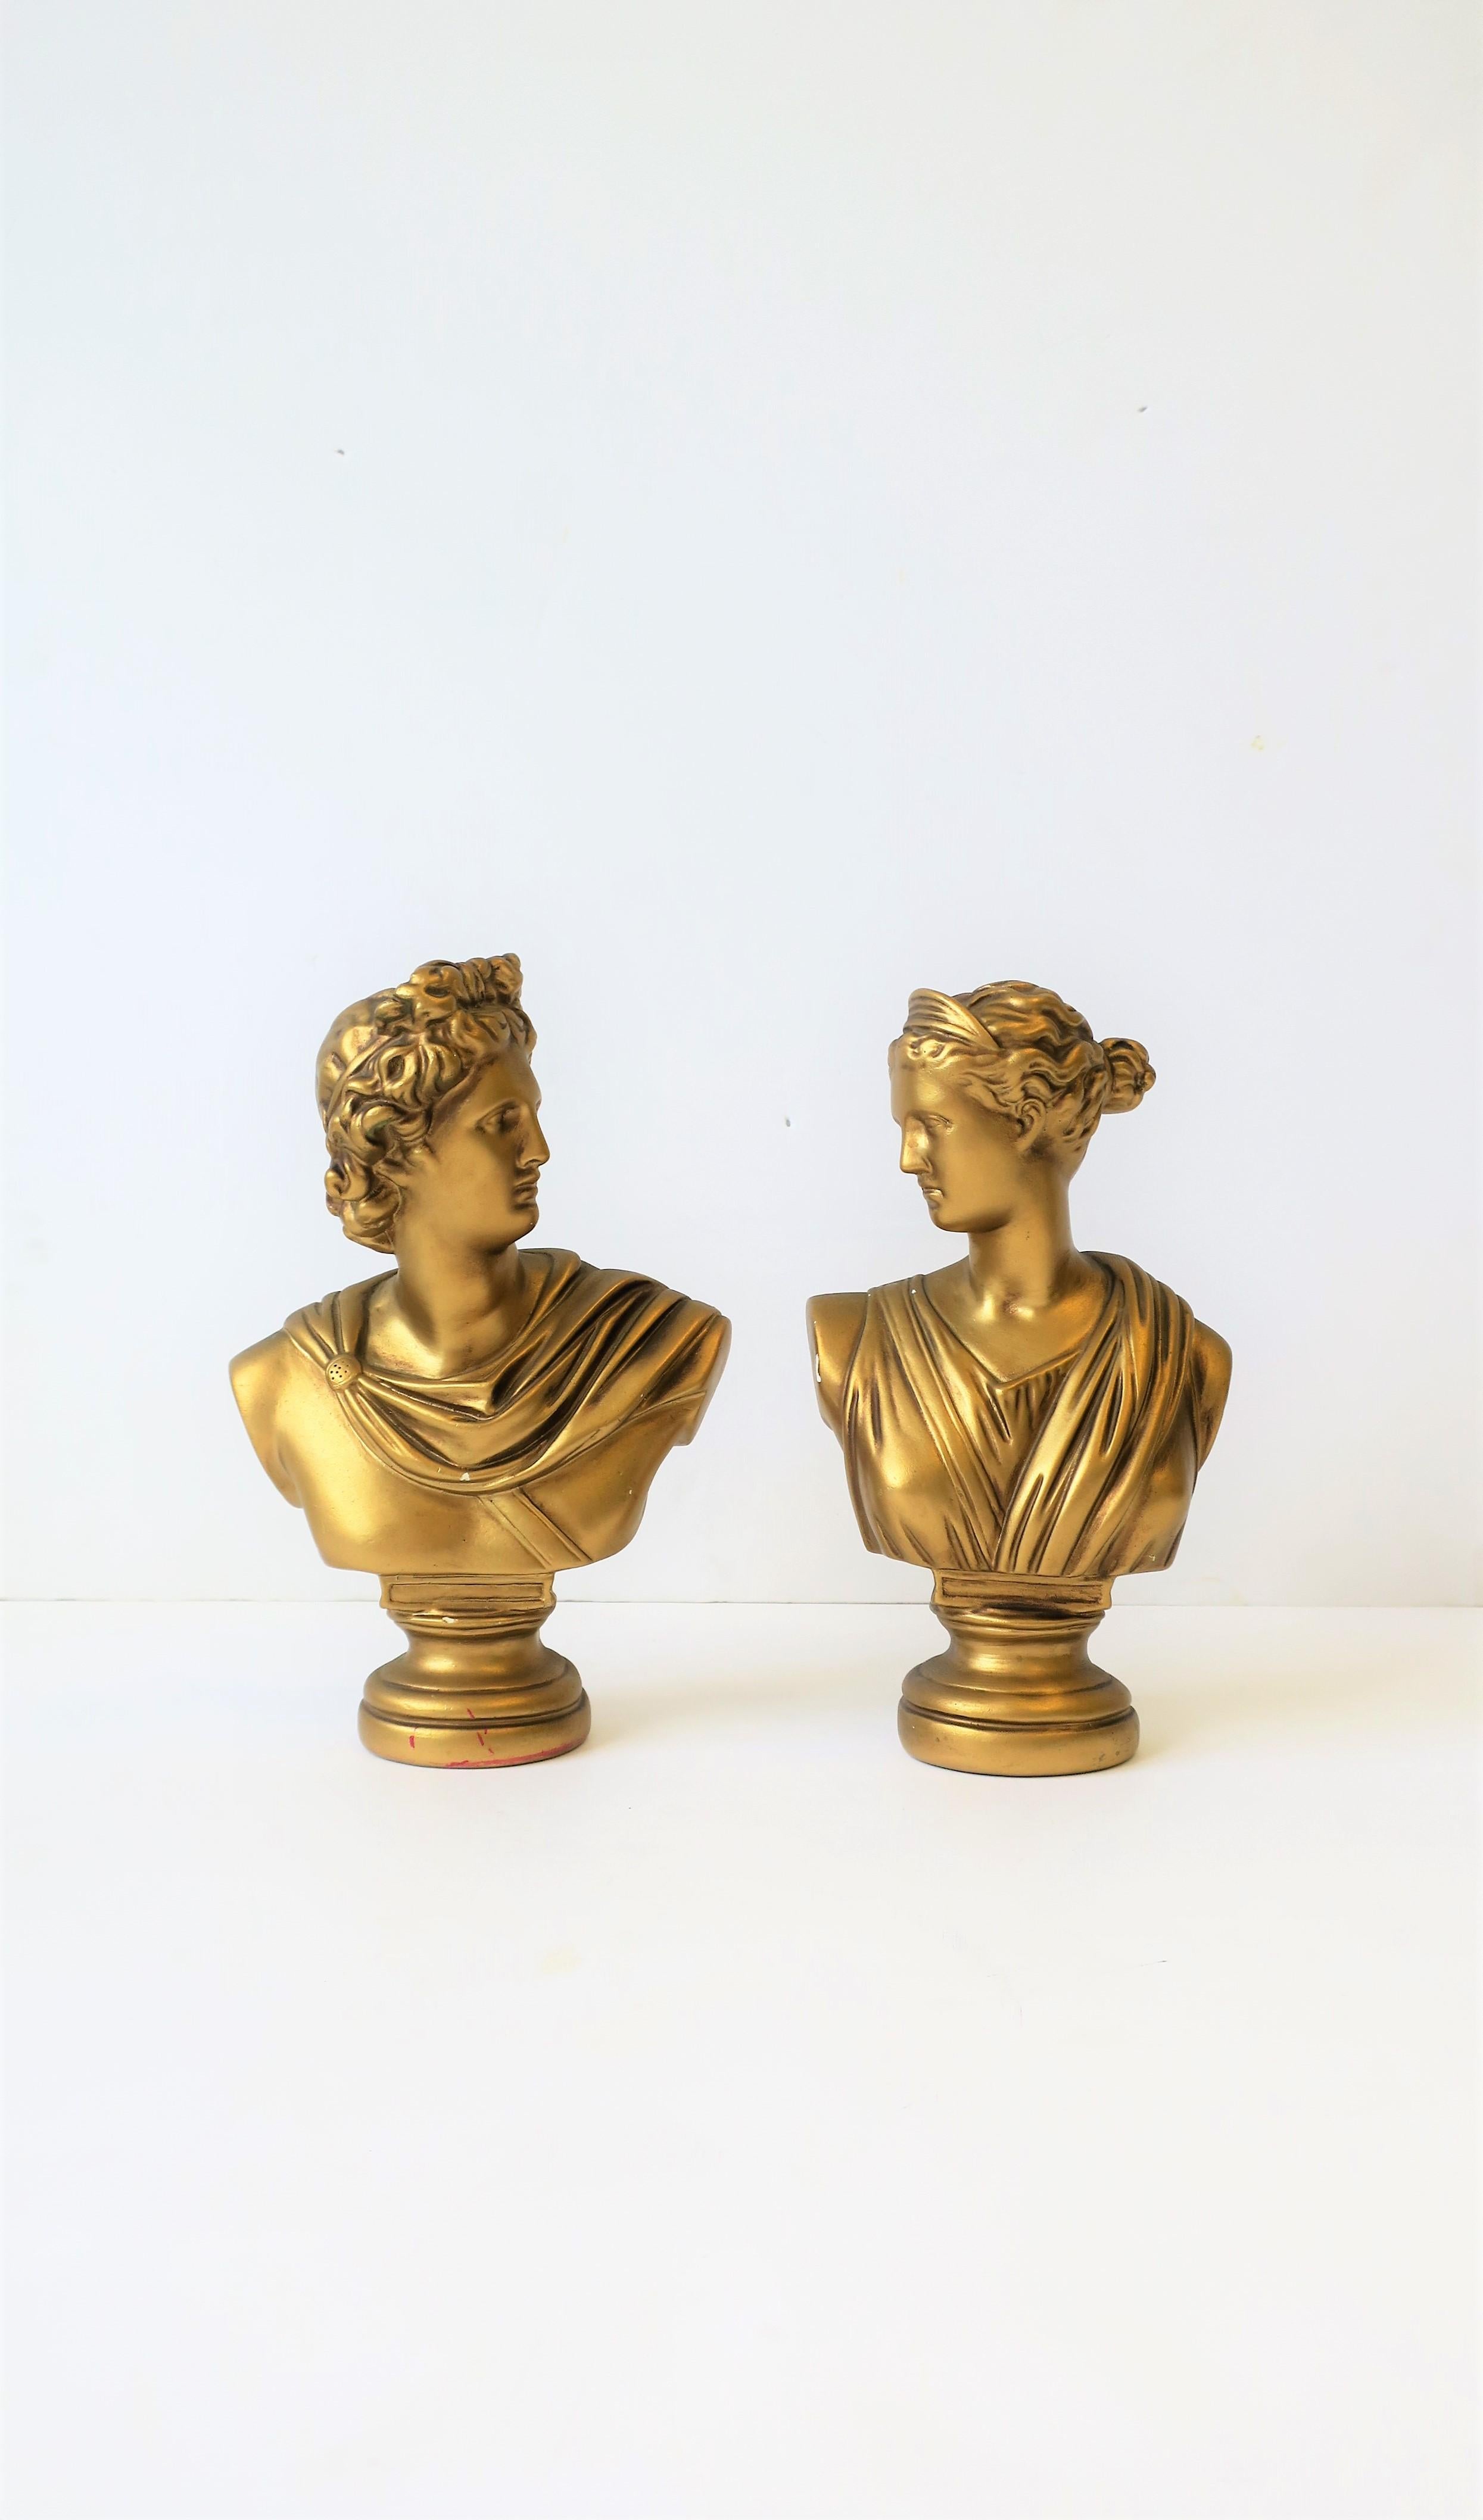 A beautiful pair of midcentury Italian male and female classical Roman style bust statue sculptures. Pieces are plaster with a gold overlay. 

Bust measurements: 
Male: 11 in. H x 7 in. W 
Female: 10.5 in. H x 6 in. W.

